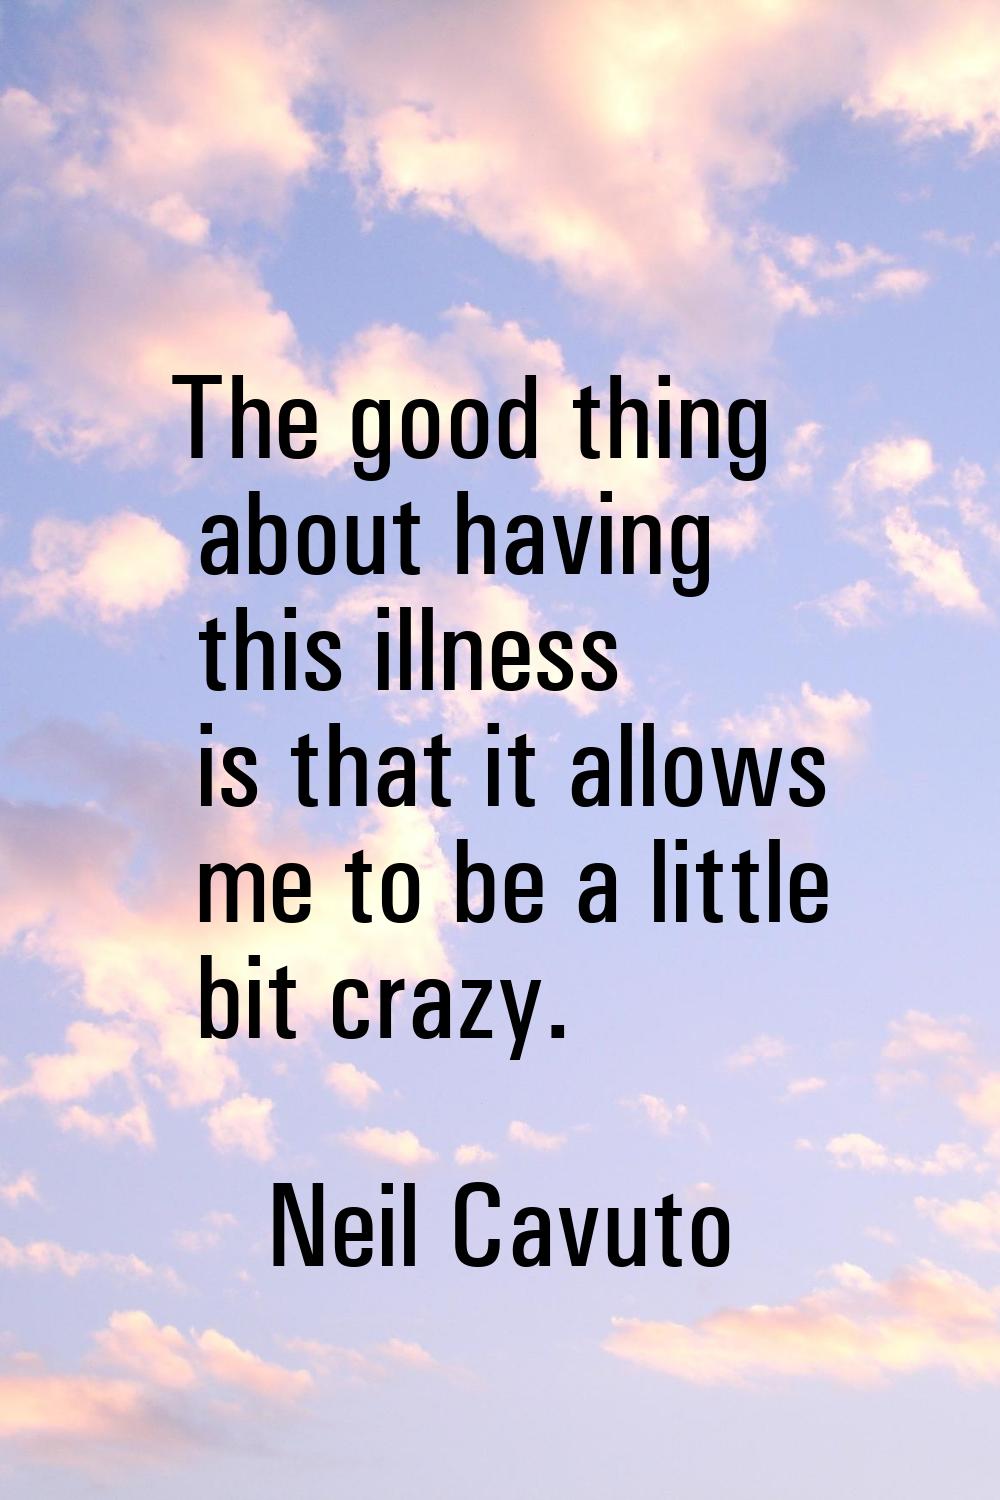 The good thing about having this illness is that it allows me to be a little bit crazy.